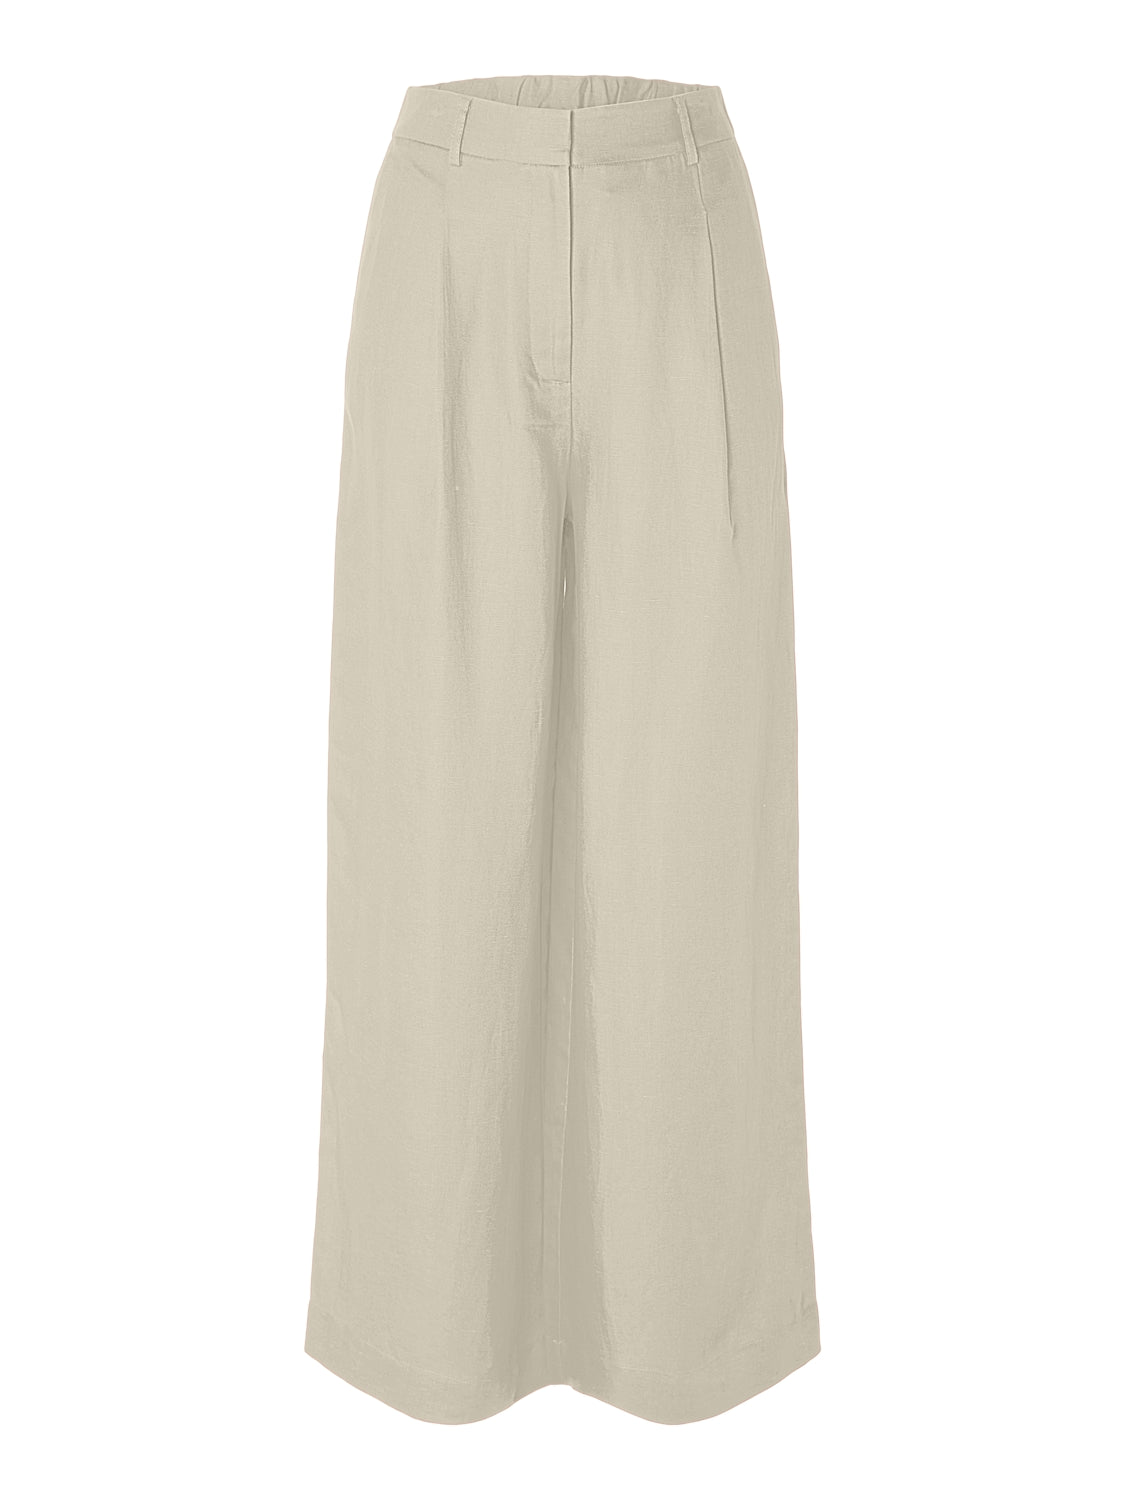 Selected Femme "Lyra" Wide Linen Pant